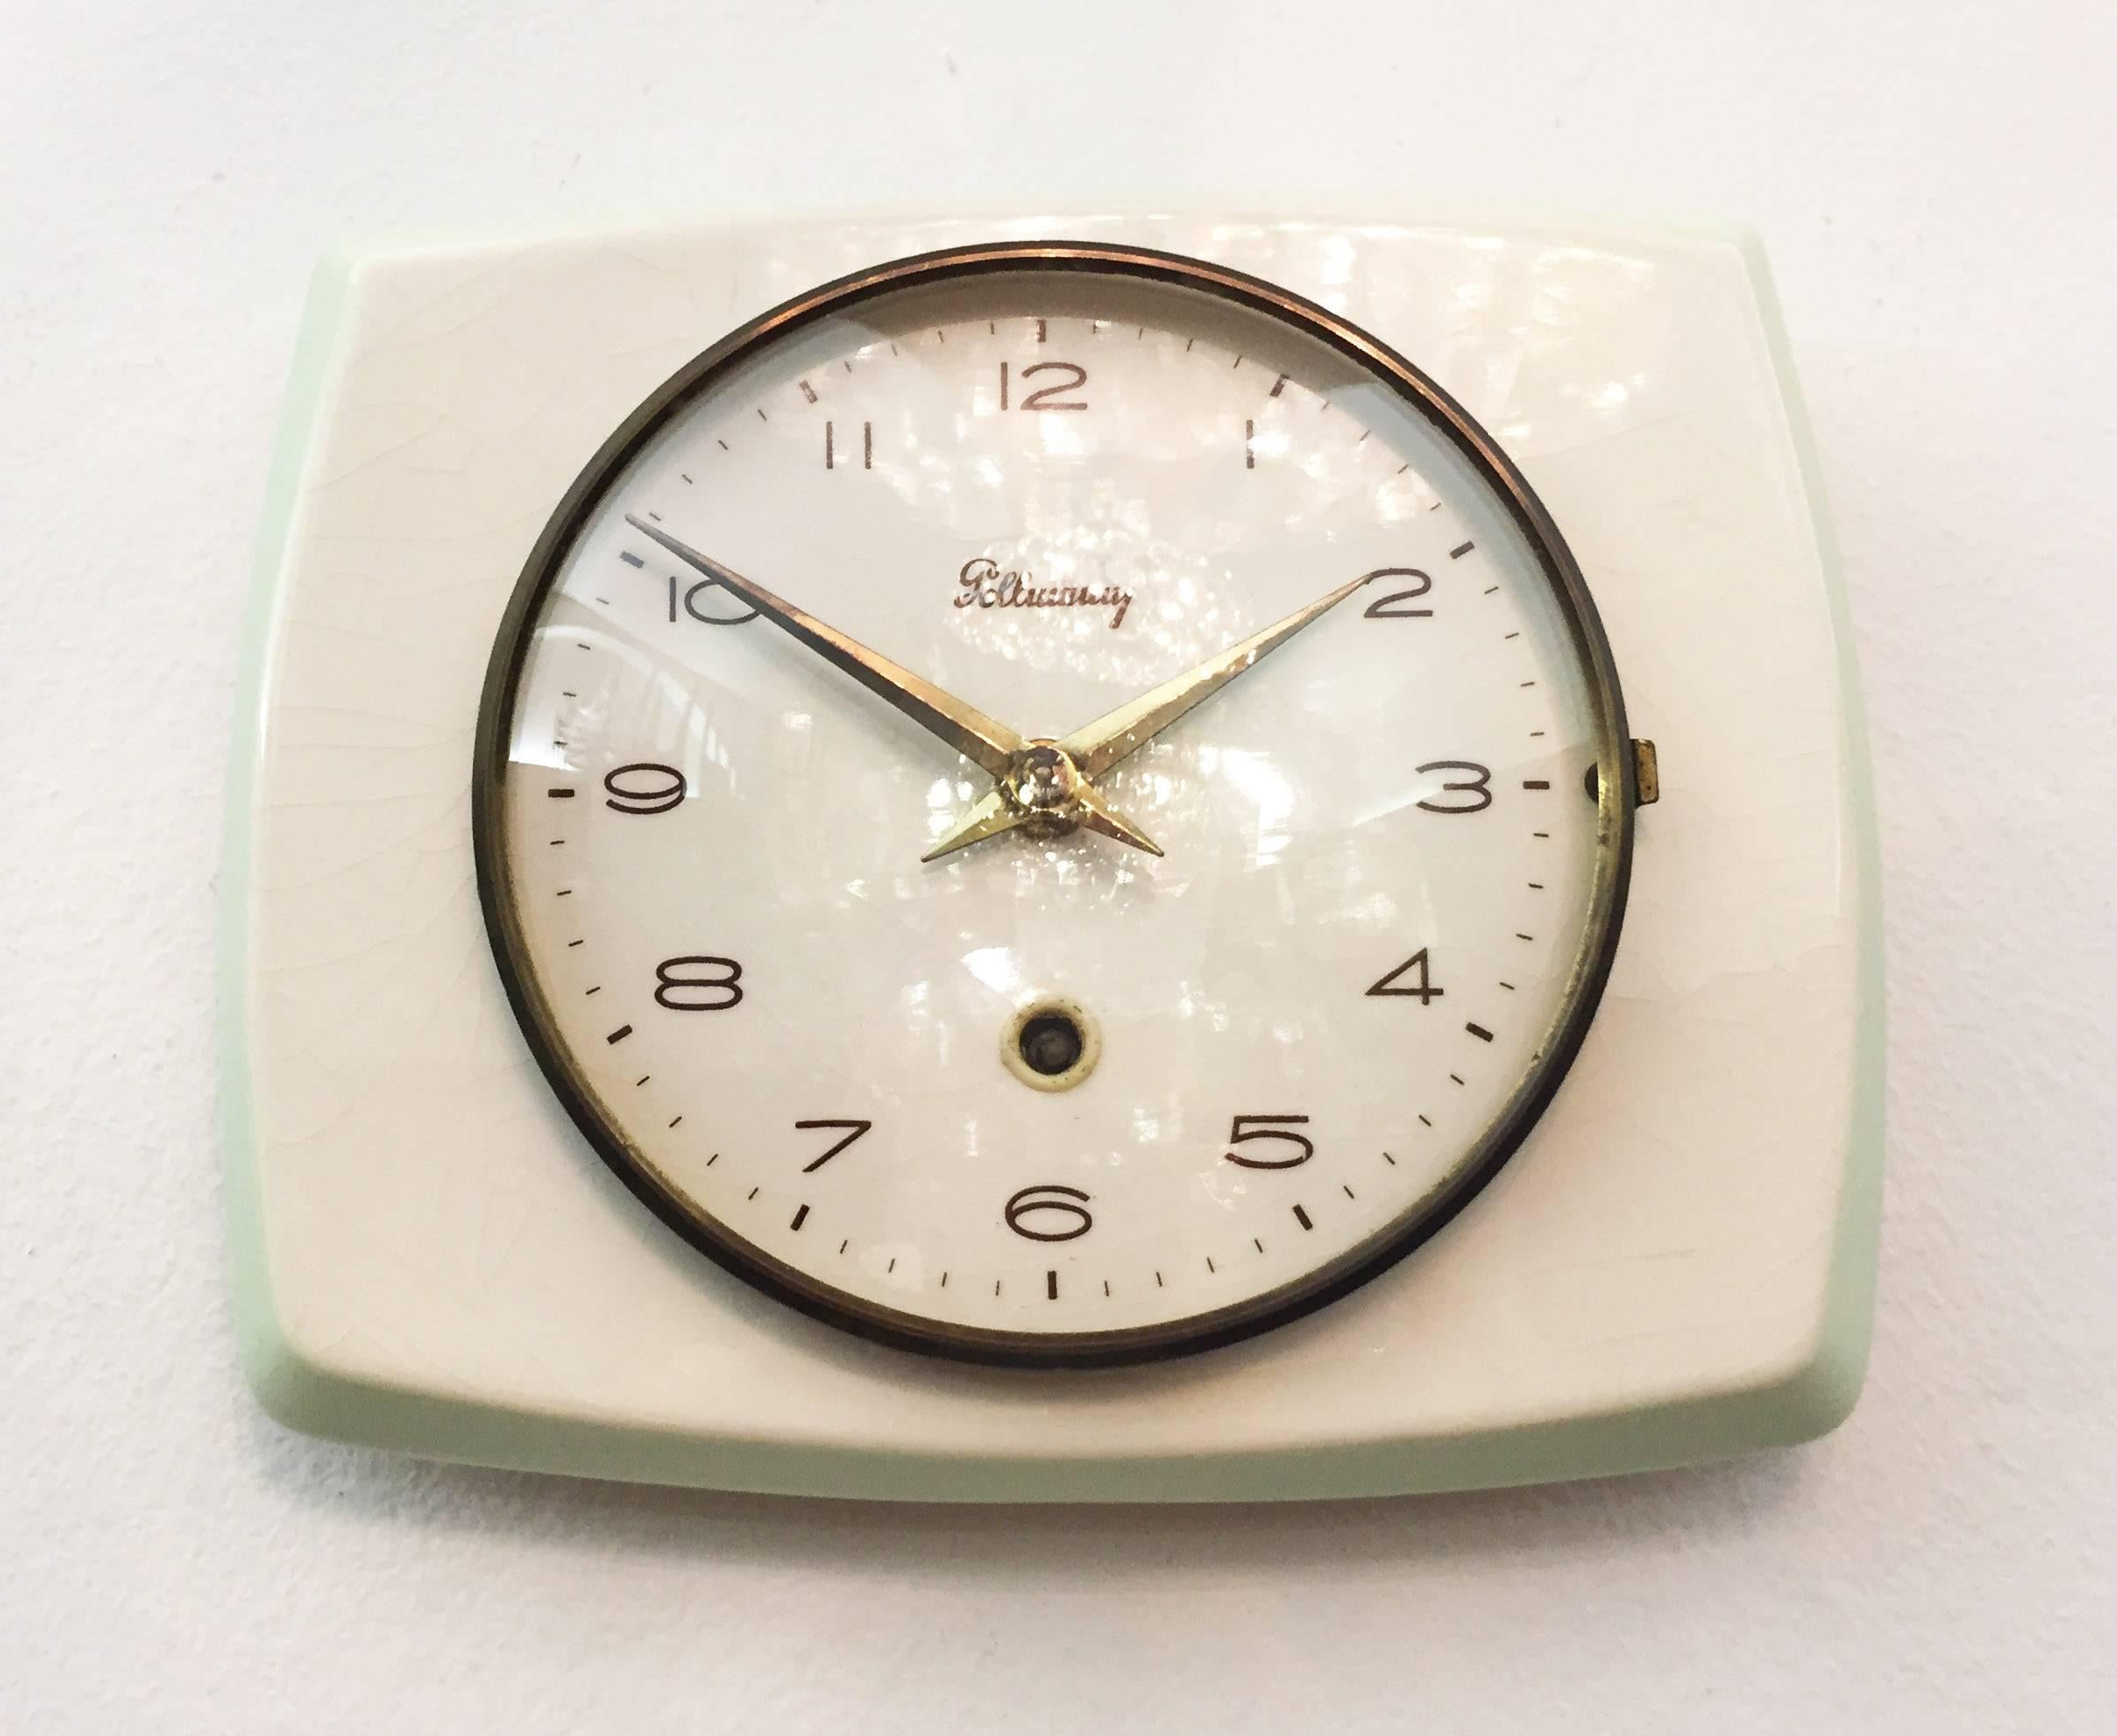 Ceramic clock with a mechanic movement made my Pollmann in Austria in the early 1950s.
Delivery time about 2-3 weeks.
The movement will be check by a clock maker before shipment. It can be also replaced to a battery movement on request.
Diameter